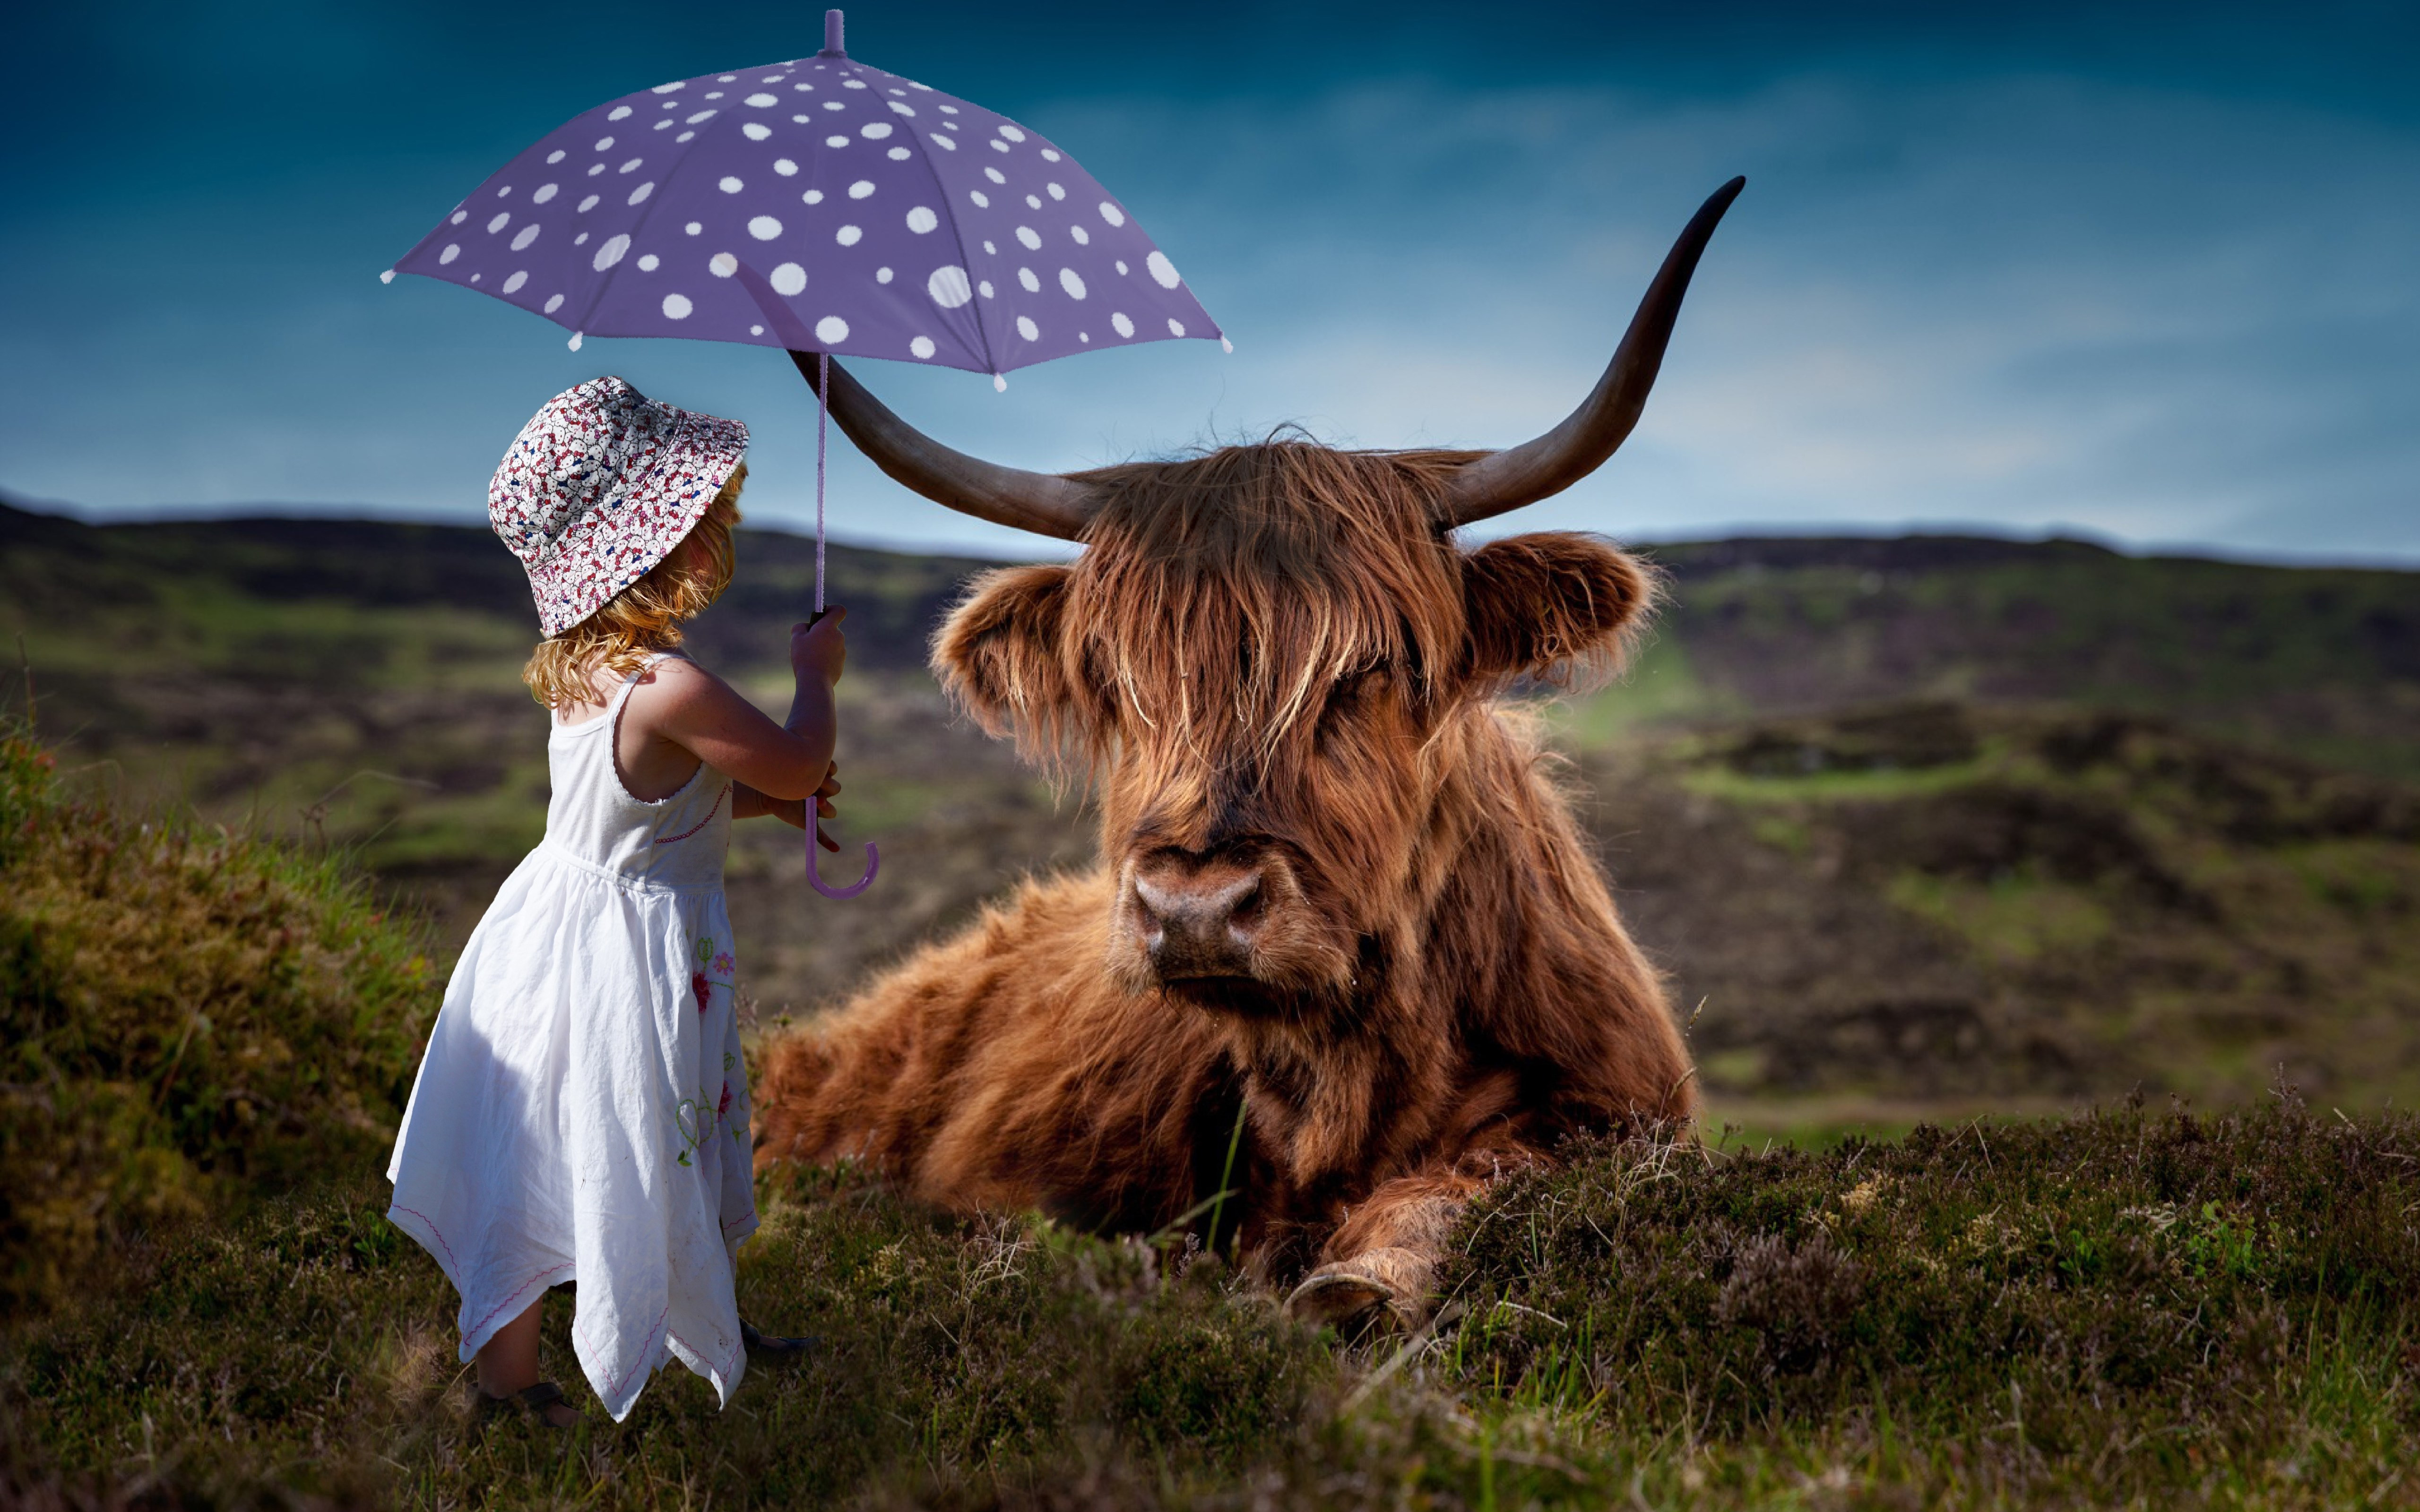 Child with the umbrella and the funny cow wallpaper 5120x3200